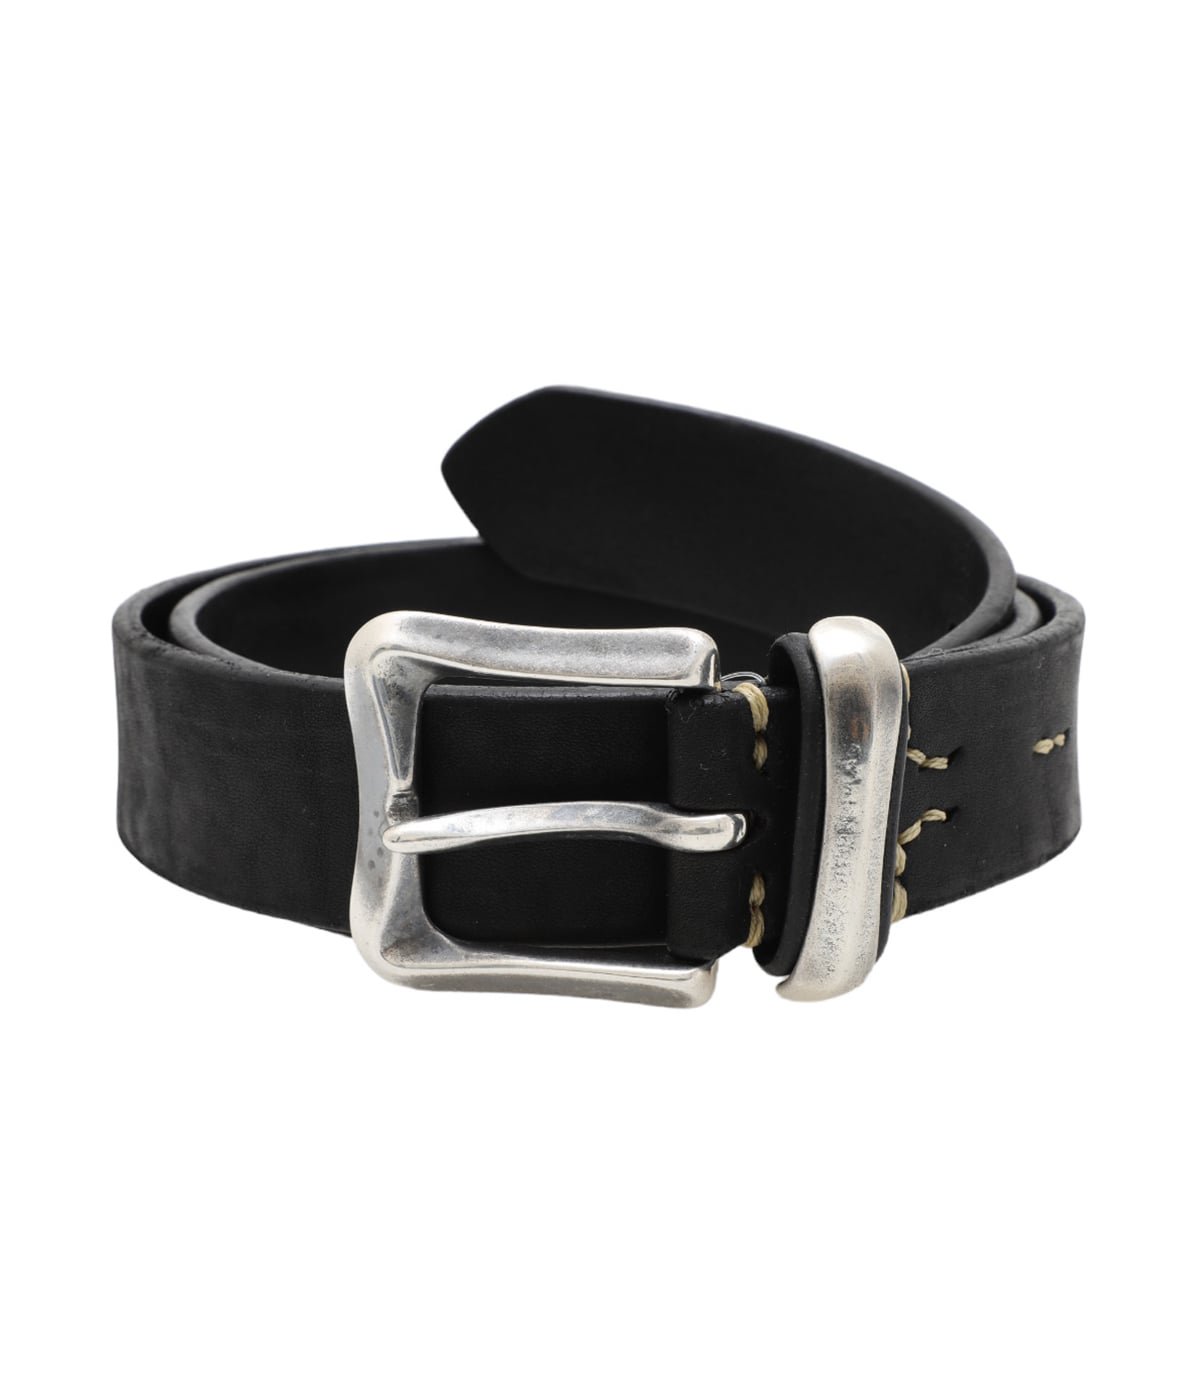 DH5675 HAND MADE LEATHER BELT